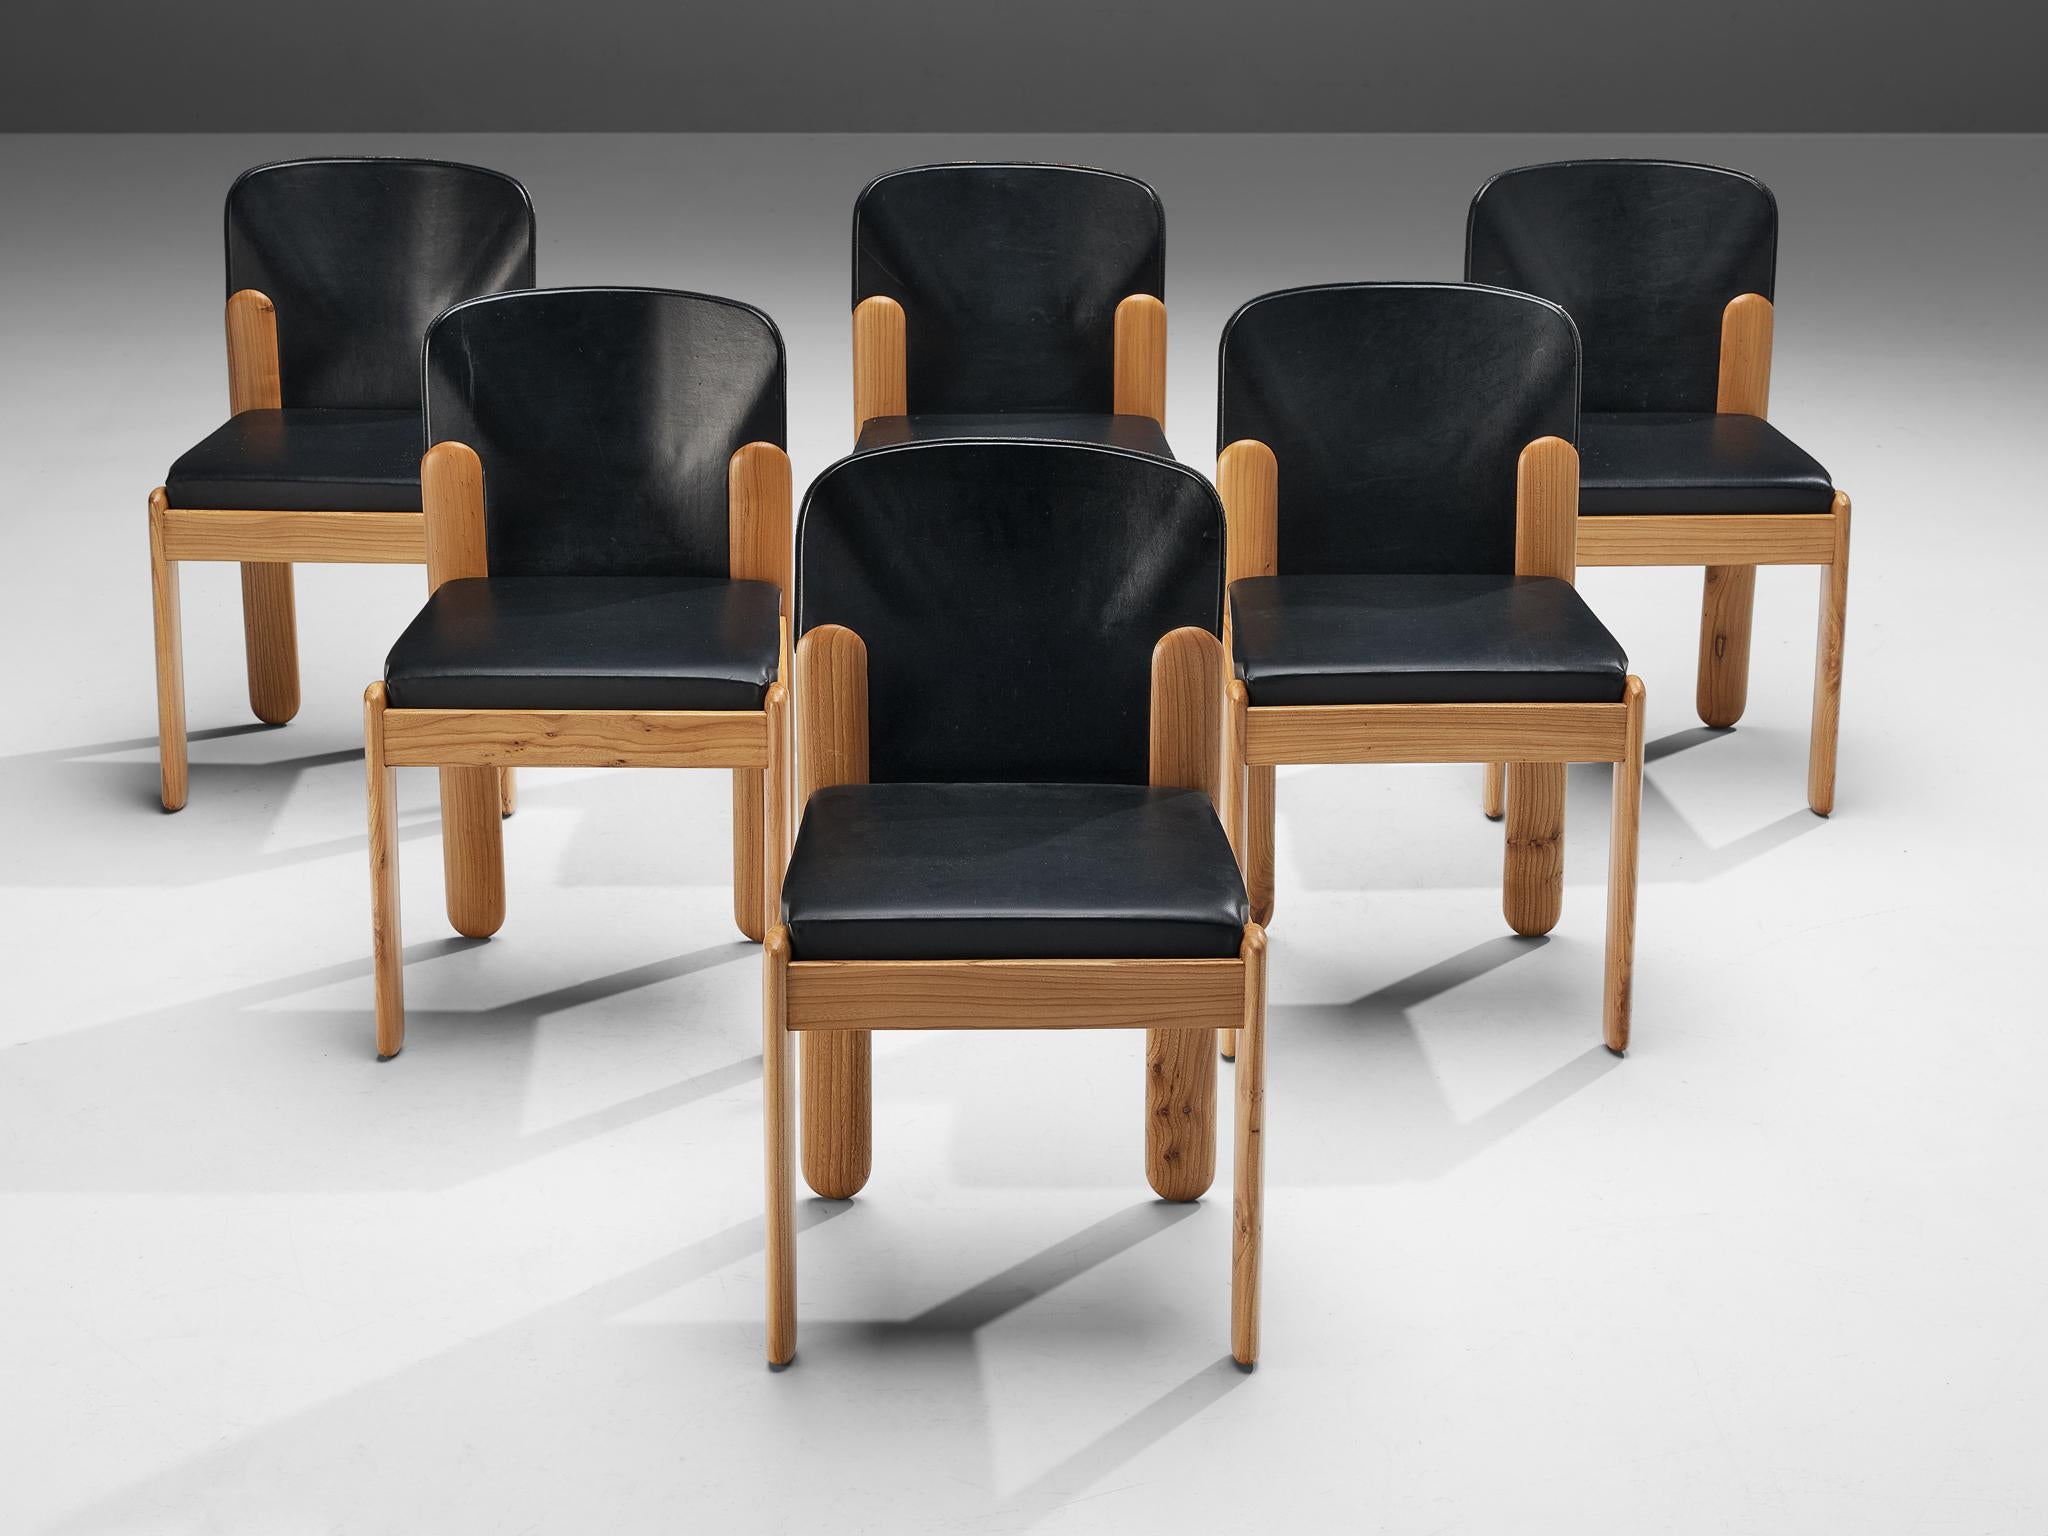 Silvio Coppola for Bernini, six dining chairs model 330, black leather, elm, Italy, 1960s

Wonderful set of six dining chairs by Italian designer Silvio Coppola. These aesthetically well balanced chairs strongly convince with the contrast between